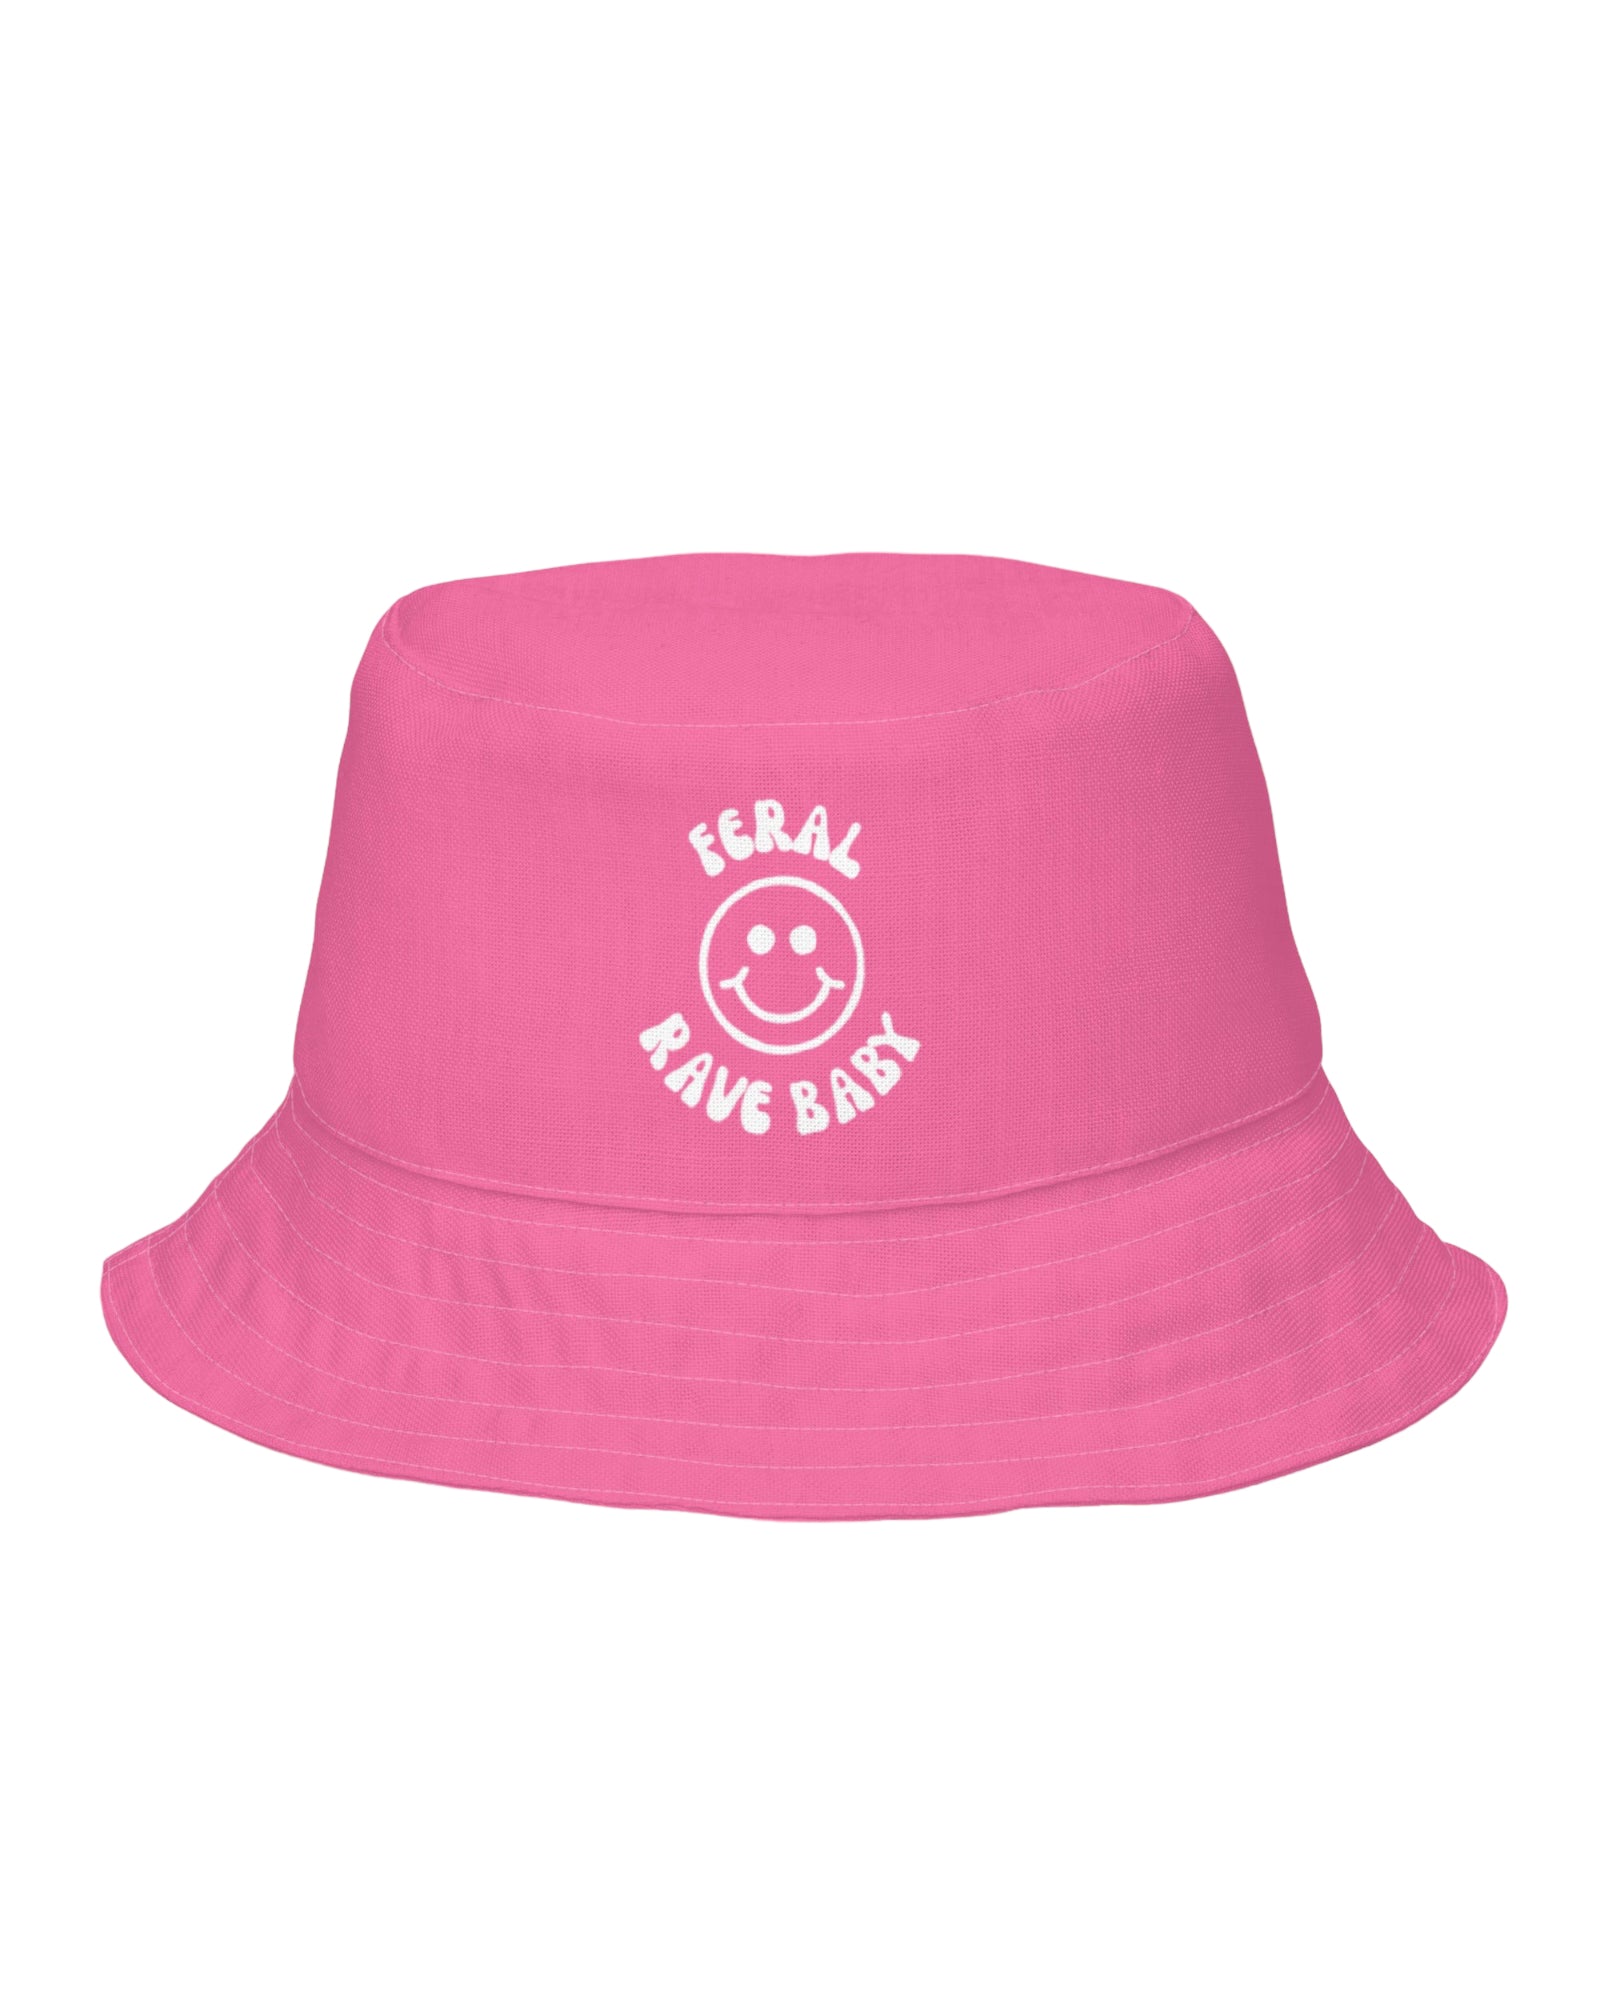 Somebody's Feral Rave Baby Reversible Bucket Hat